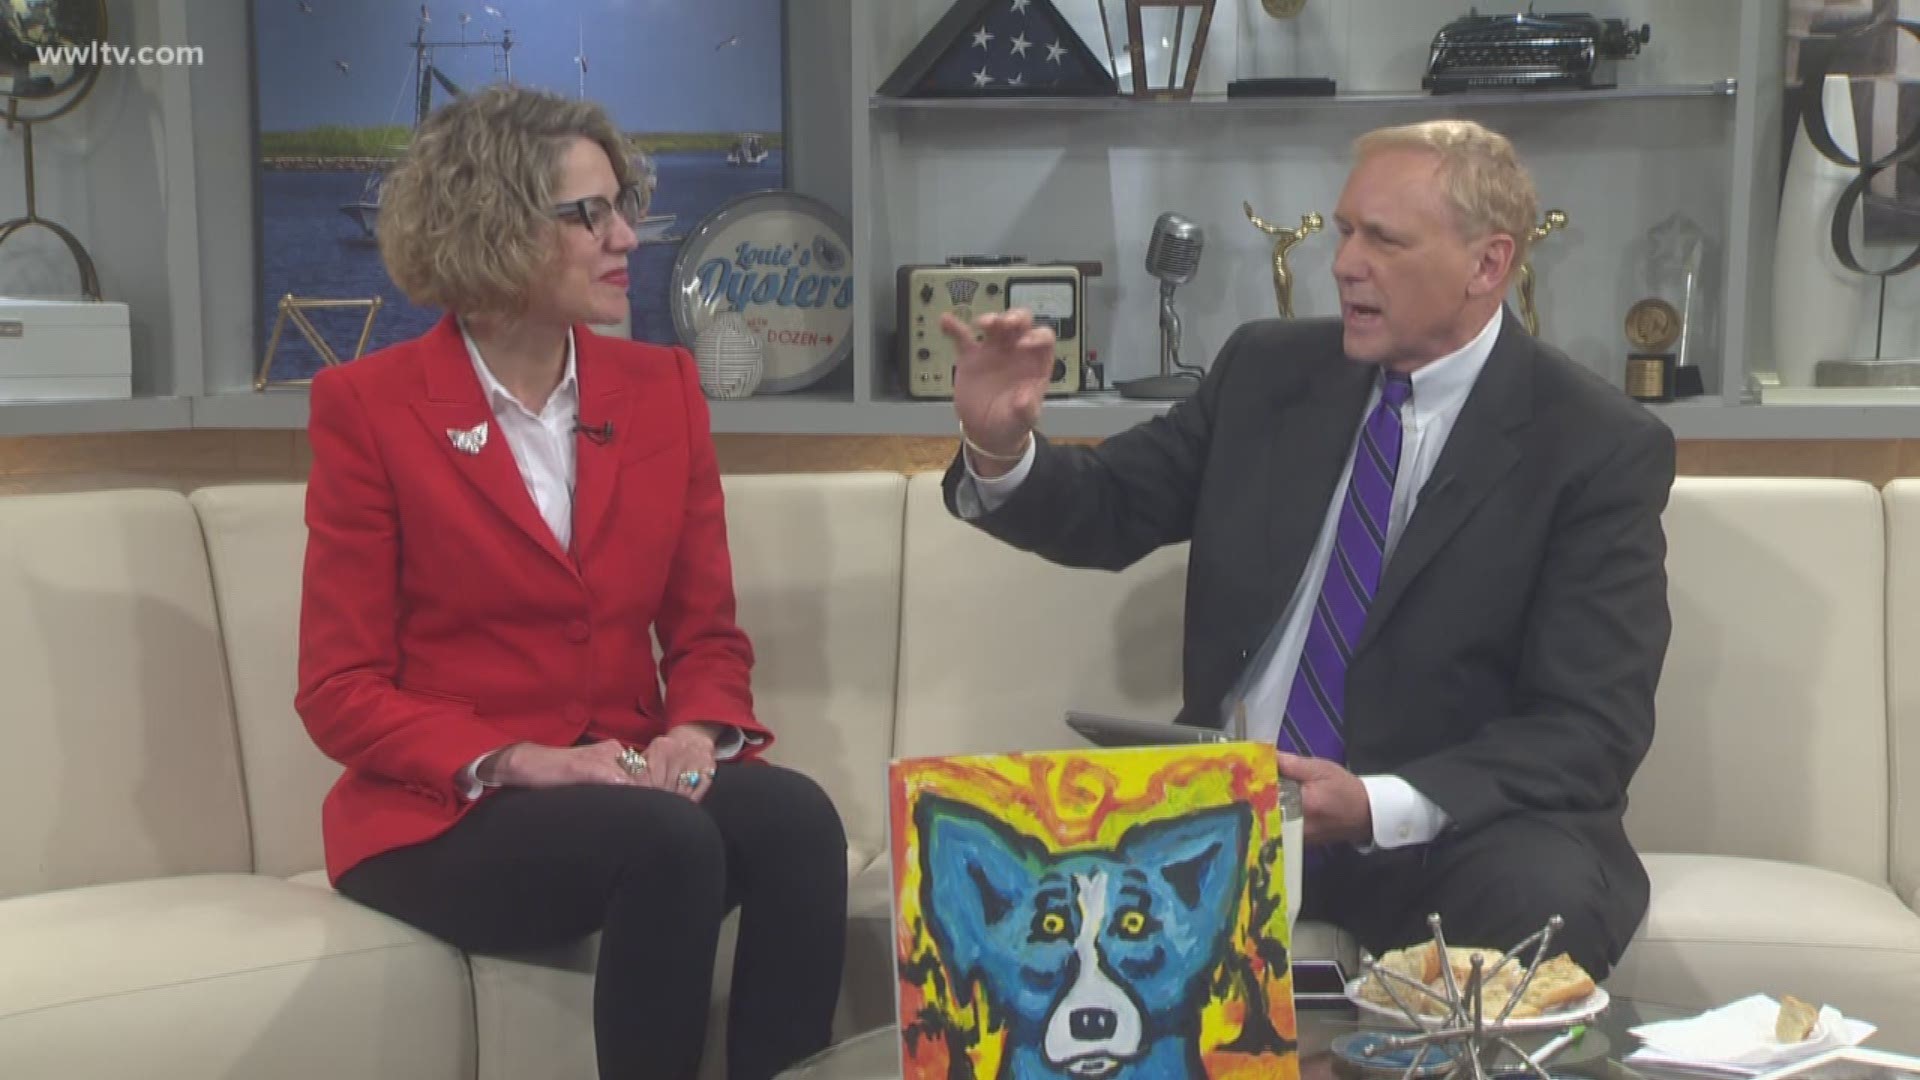 Wendy Rodrigue, widow of the late George Rodrigue, tells Eric Paulsen about her tour to honor her late husband and the legacy he leaves behind.